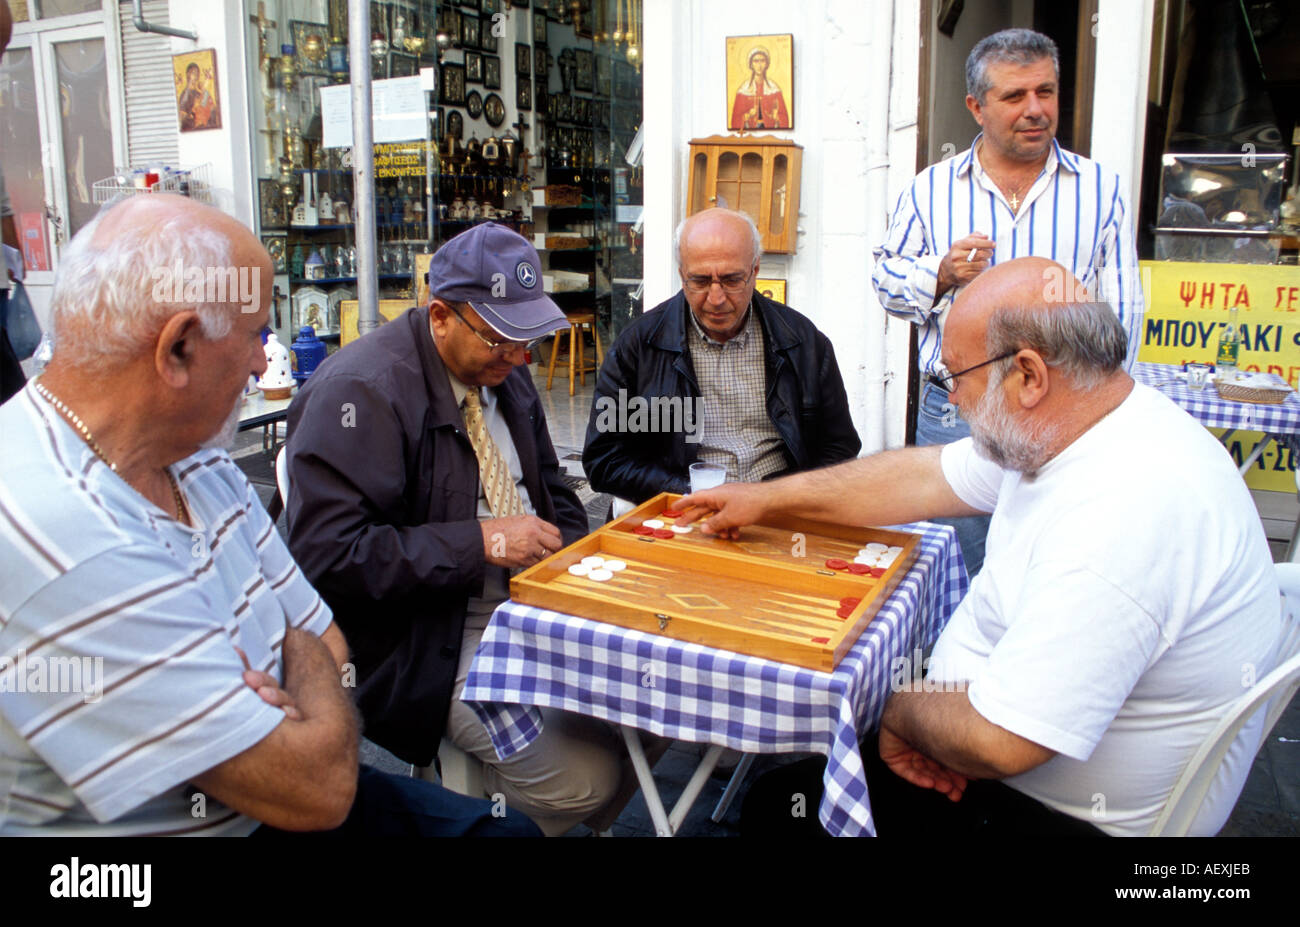 Typical Greek Street Scene. A bunch of men gathered around a table watching a game of backgammon / Tavli Stock Photo